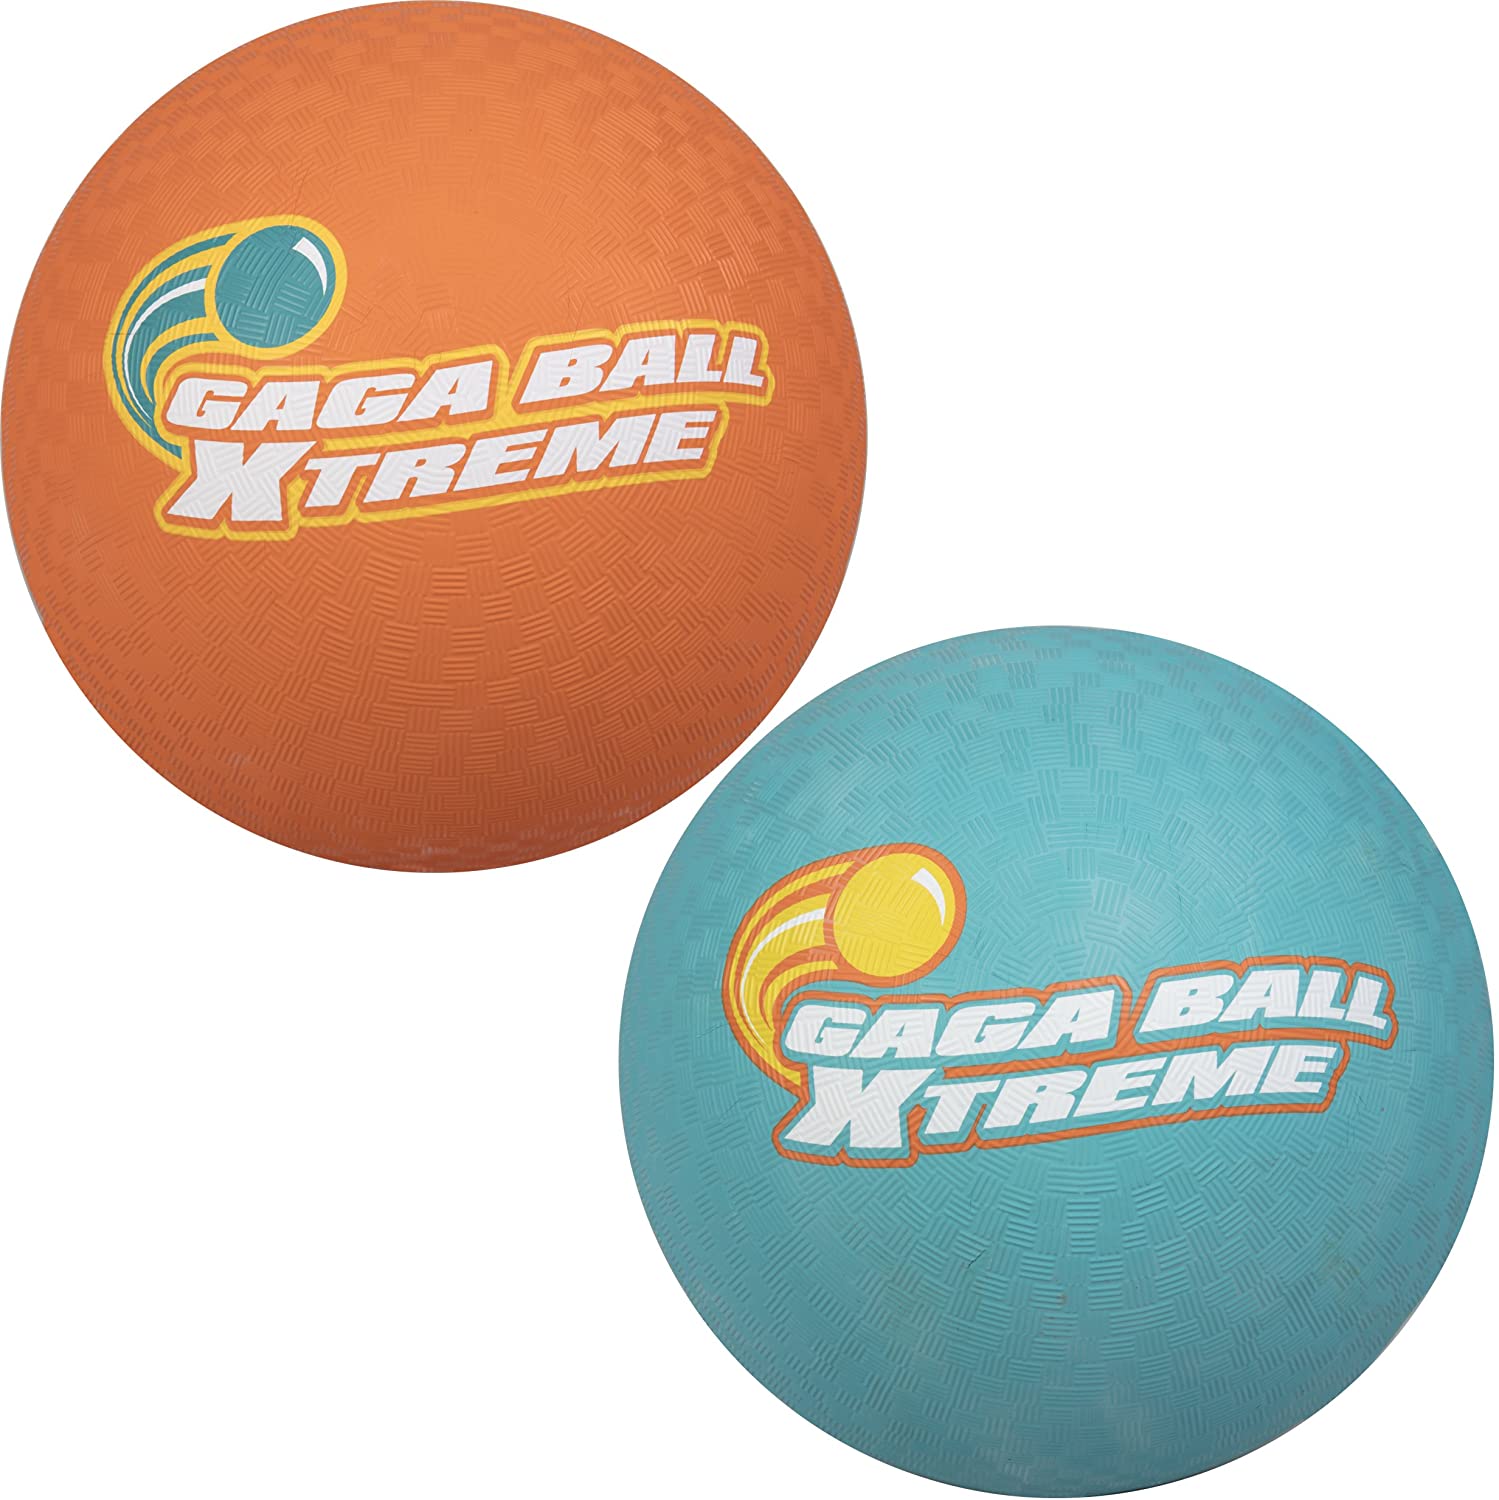 SCS Direct, Gaga Playground Balls 2pk (8.5 inches) - Durable Rubber Lightweight and Great for Dodgeball Kickball Gagaball Official Play